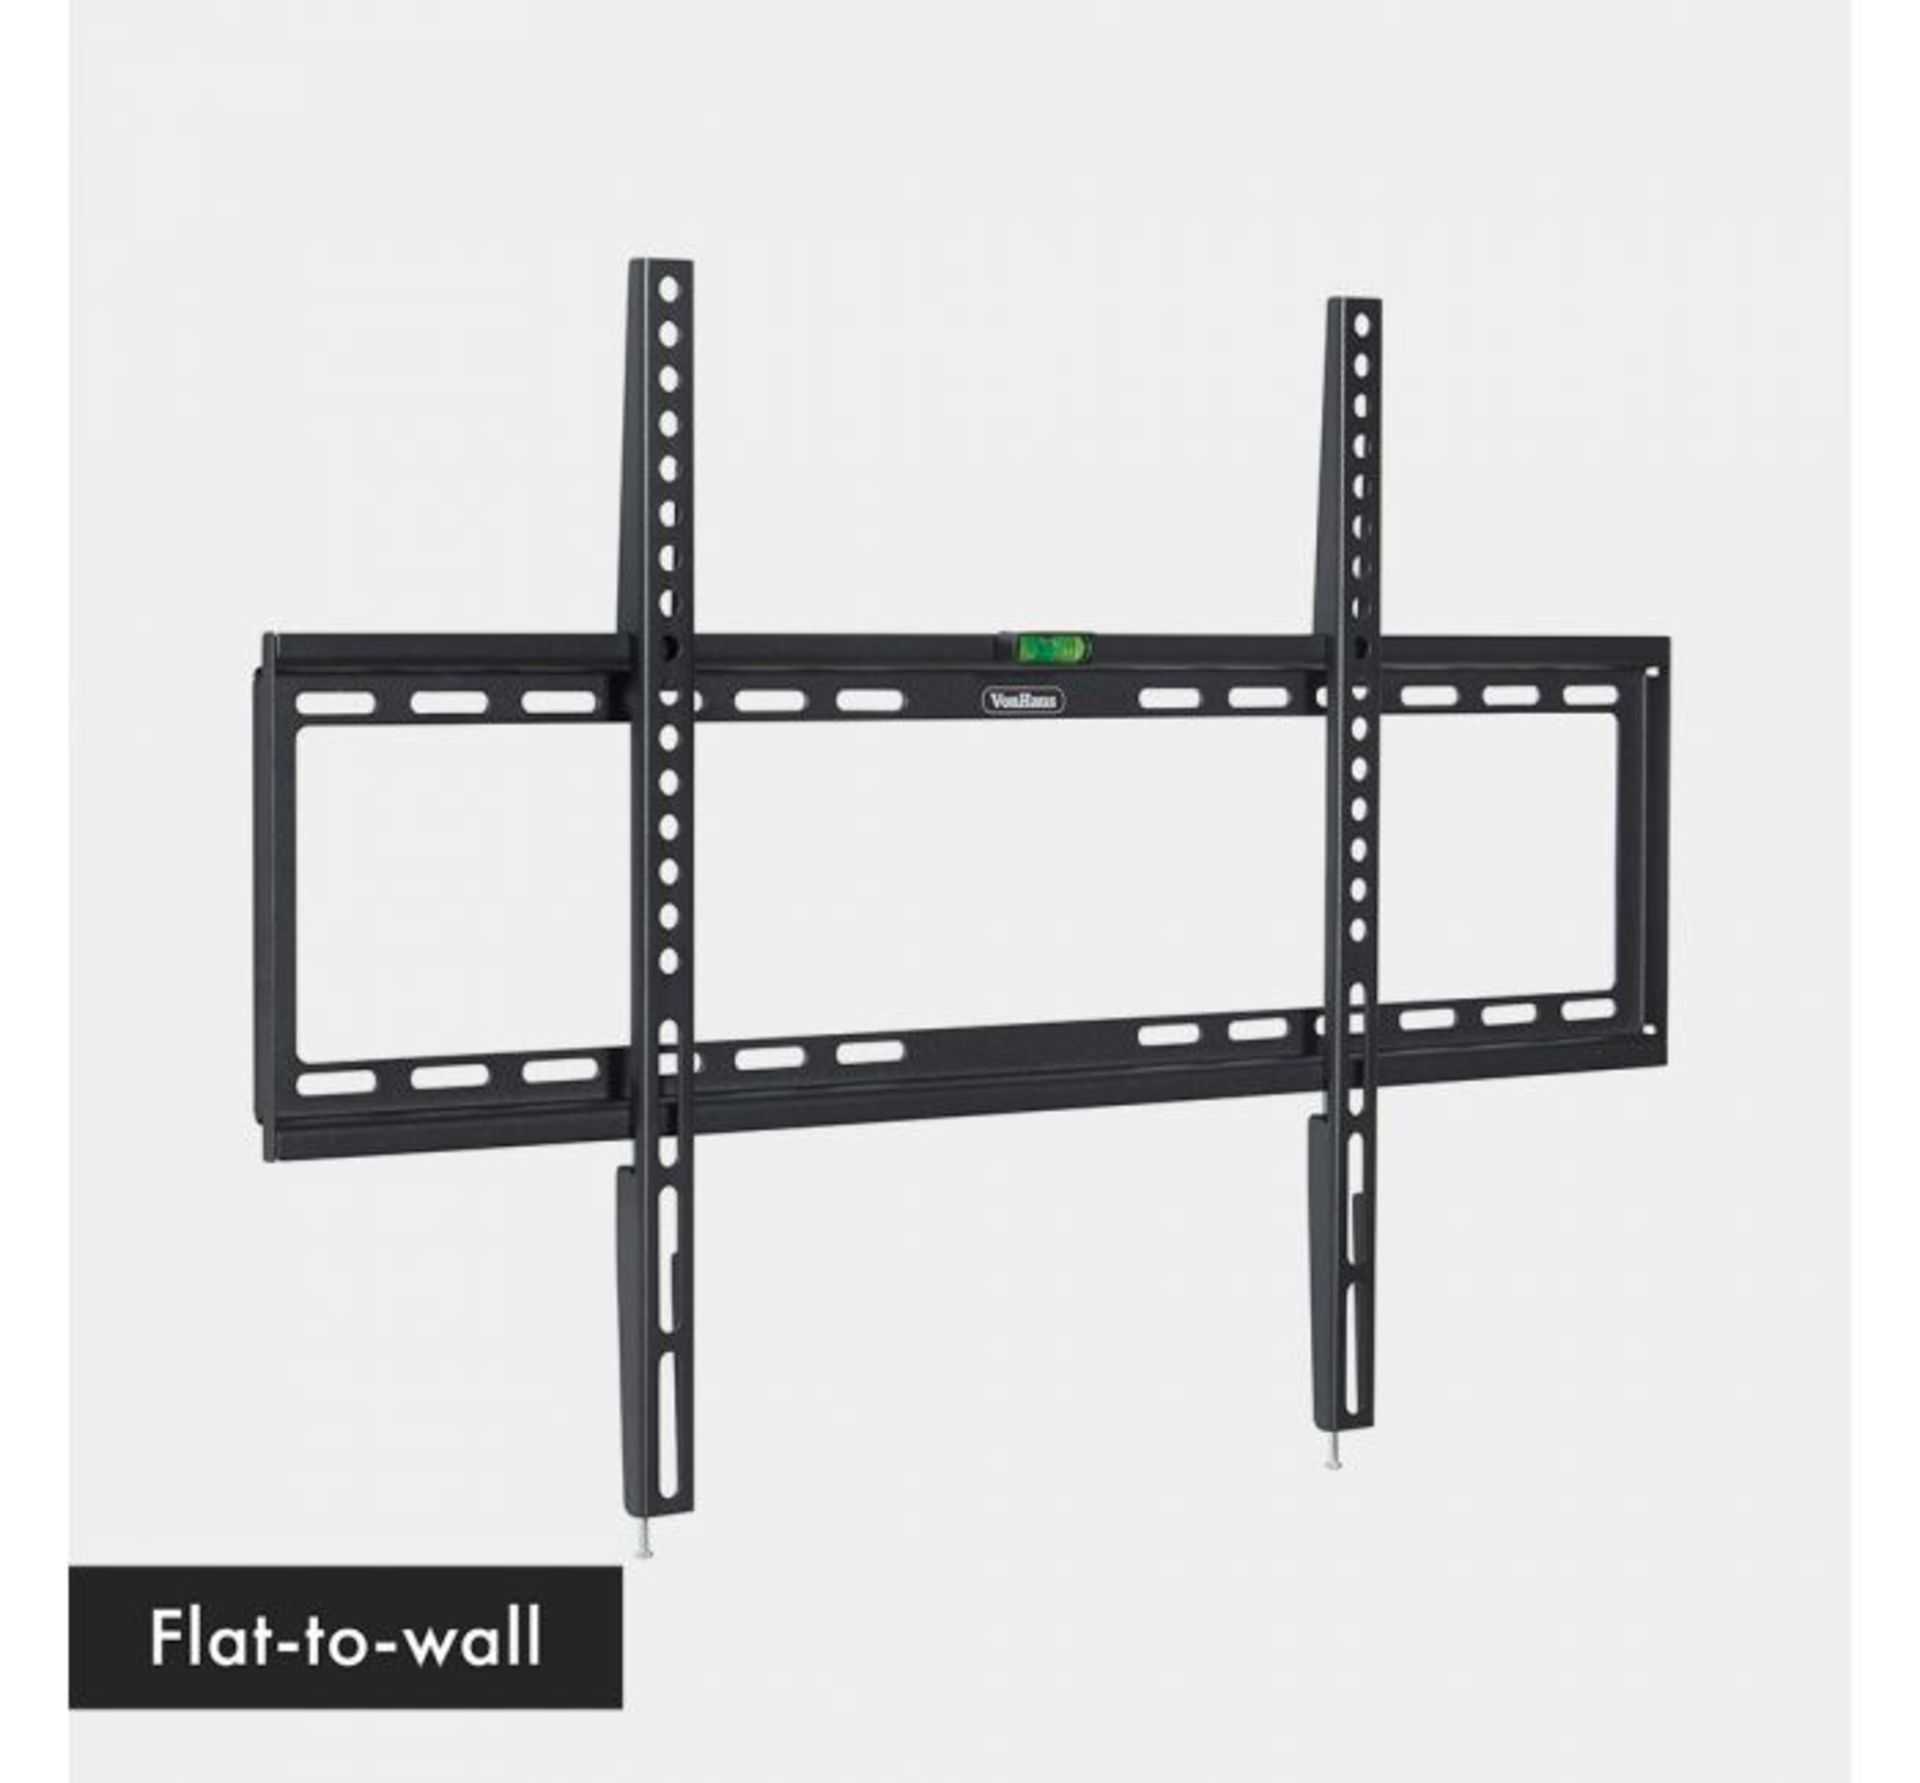 (HZ110) 37-70 inch Flat-to-wall TV bracket Please confirm your TV’s VESA Mounting Dimensions...